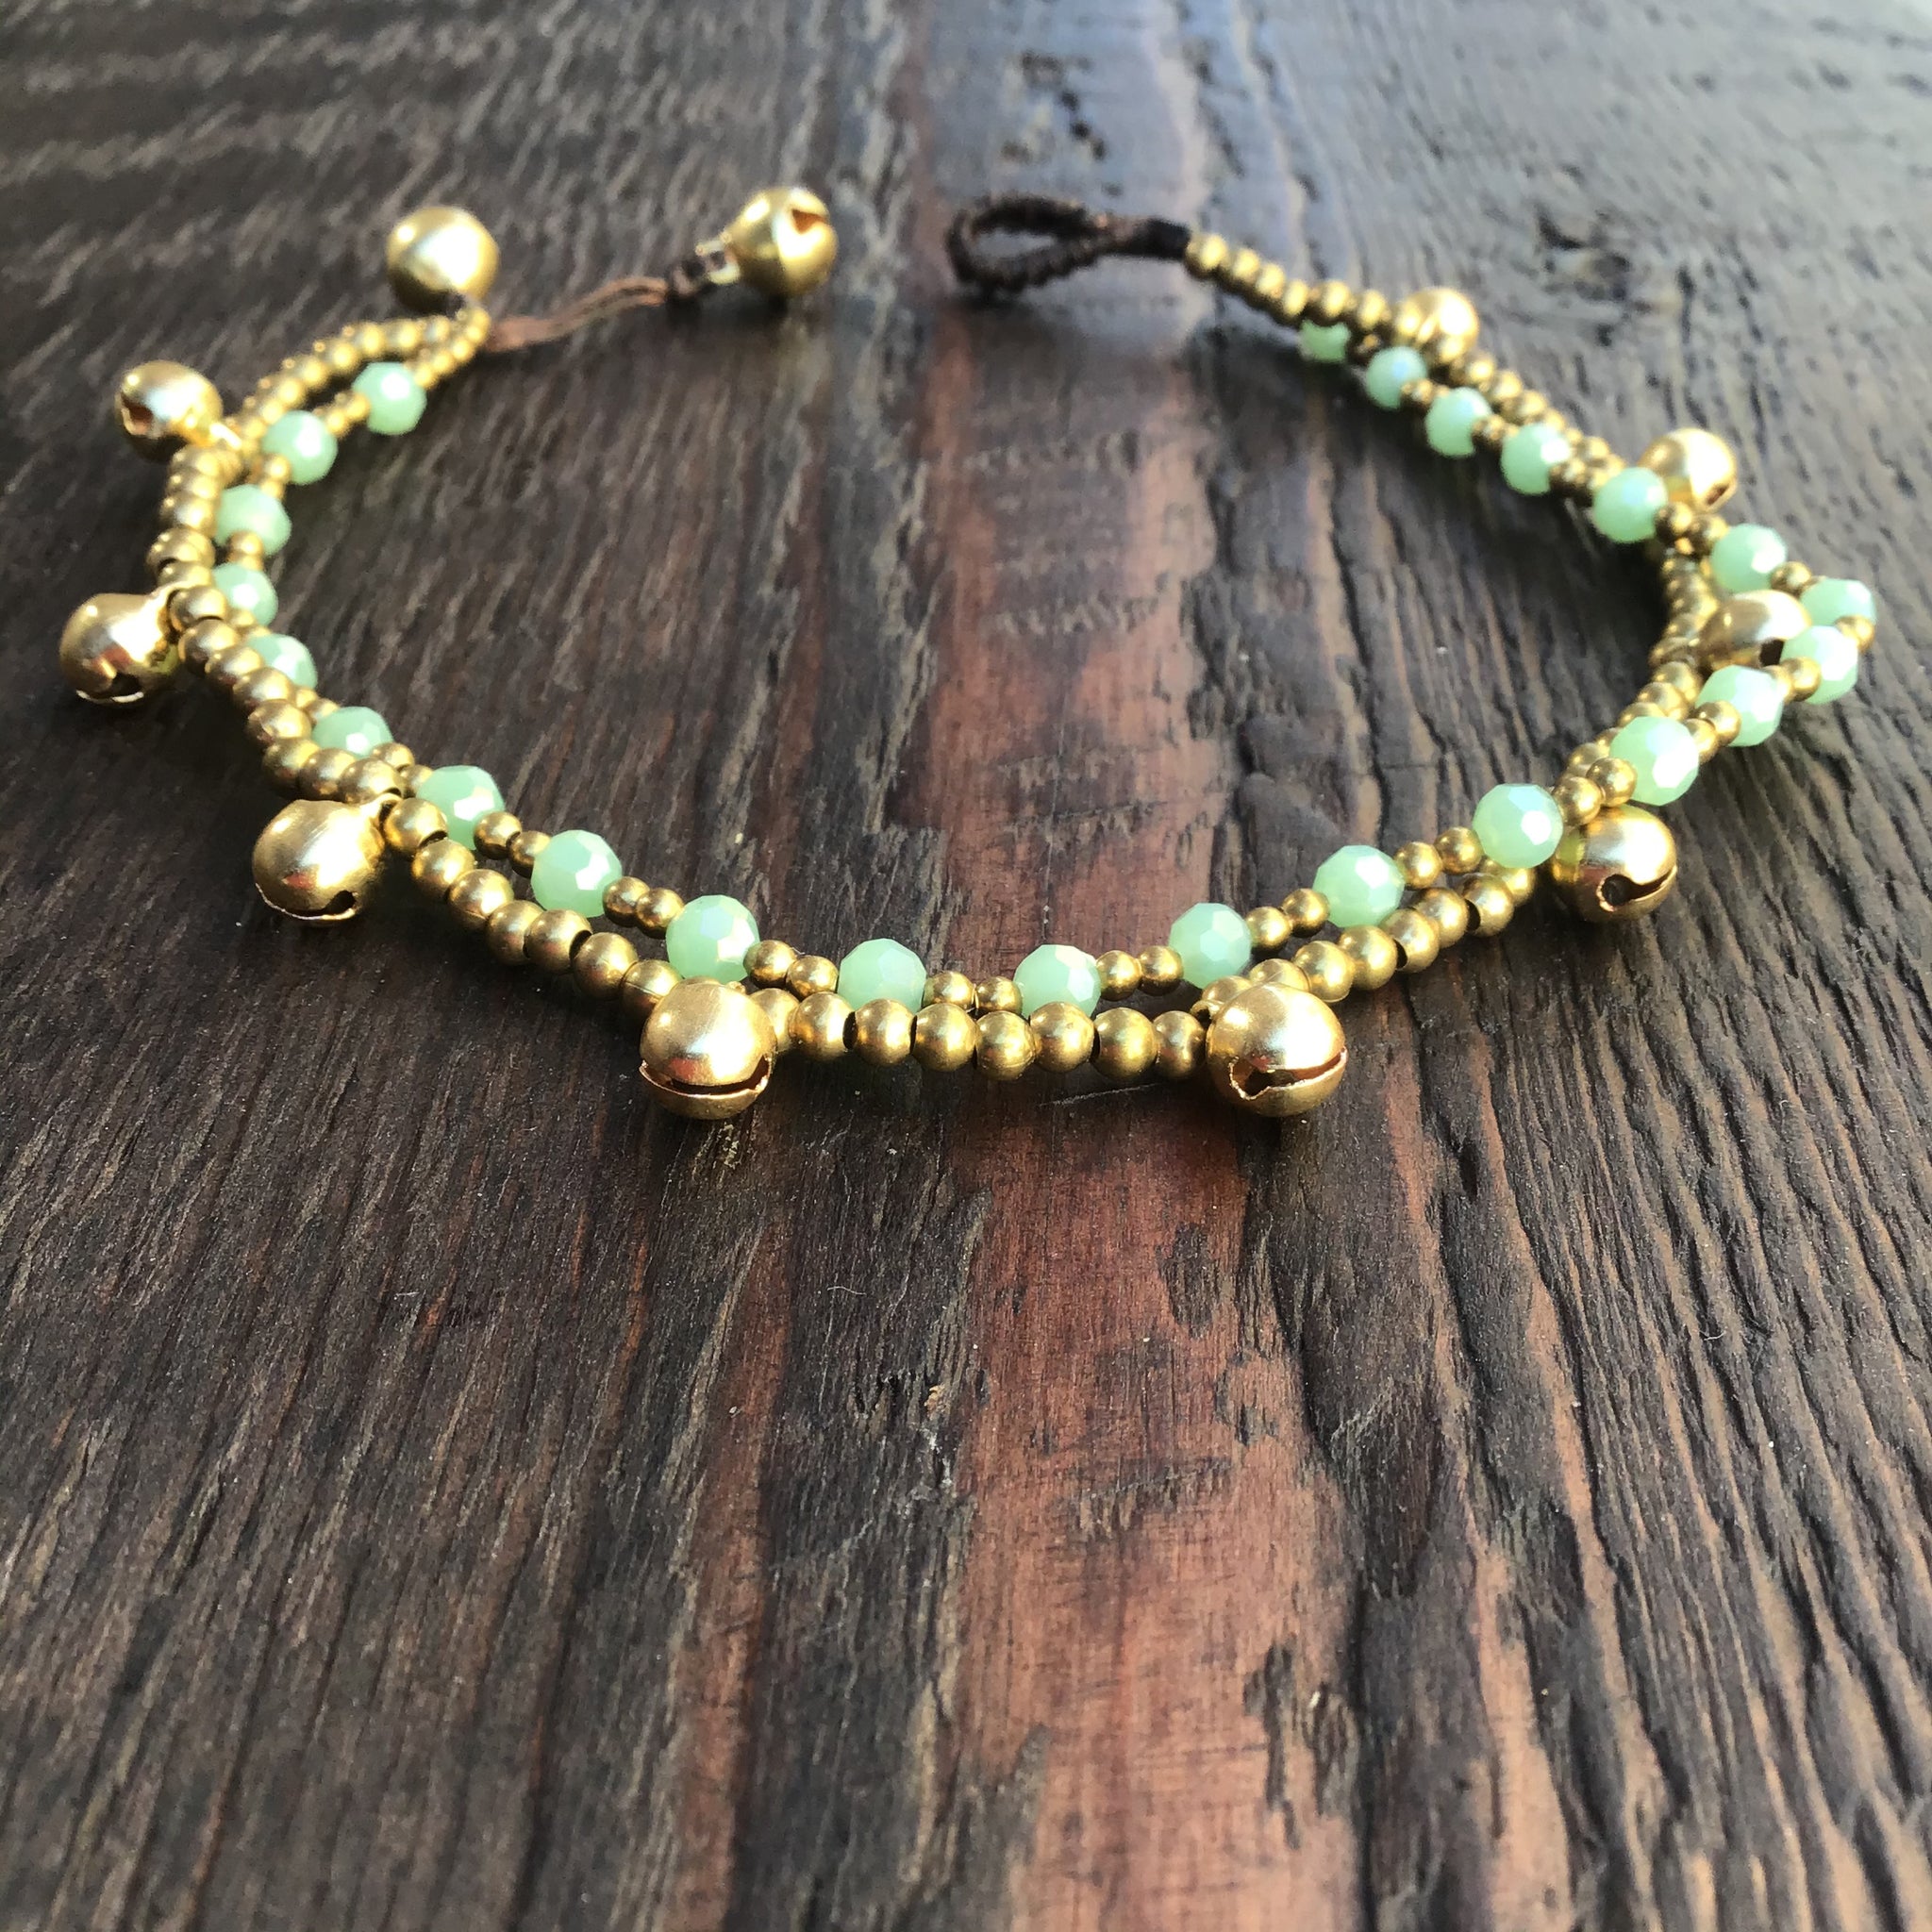 ‘Bead Love' 2 Strand Anklet with Faceted Beads (Pale Green)